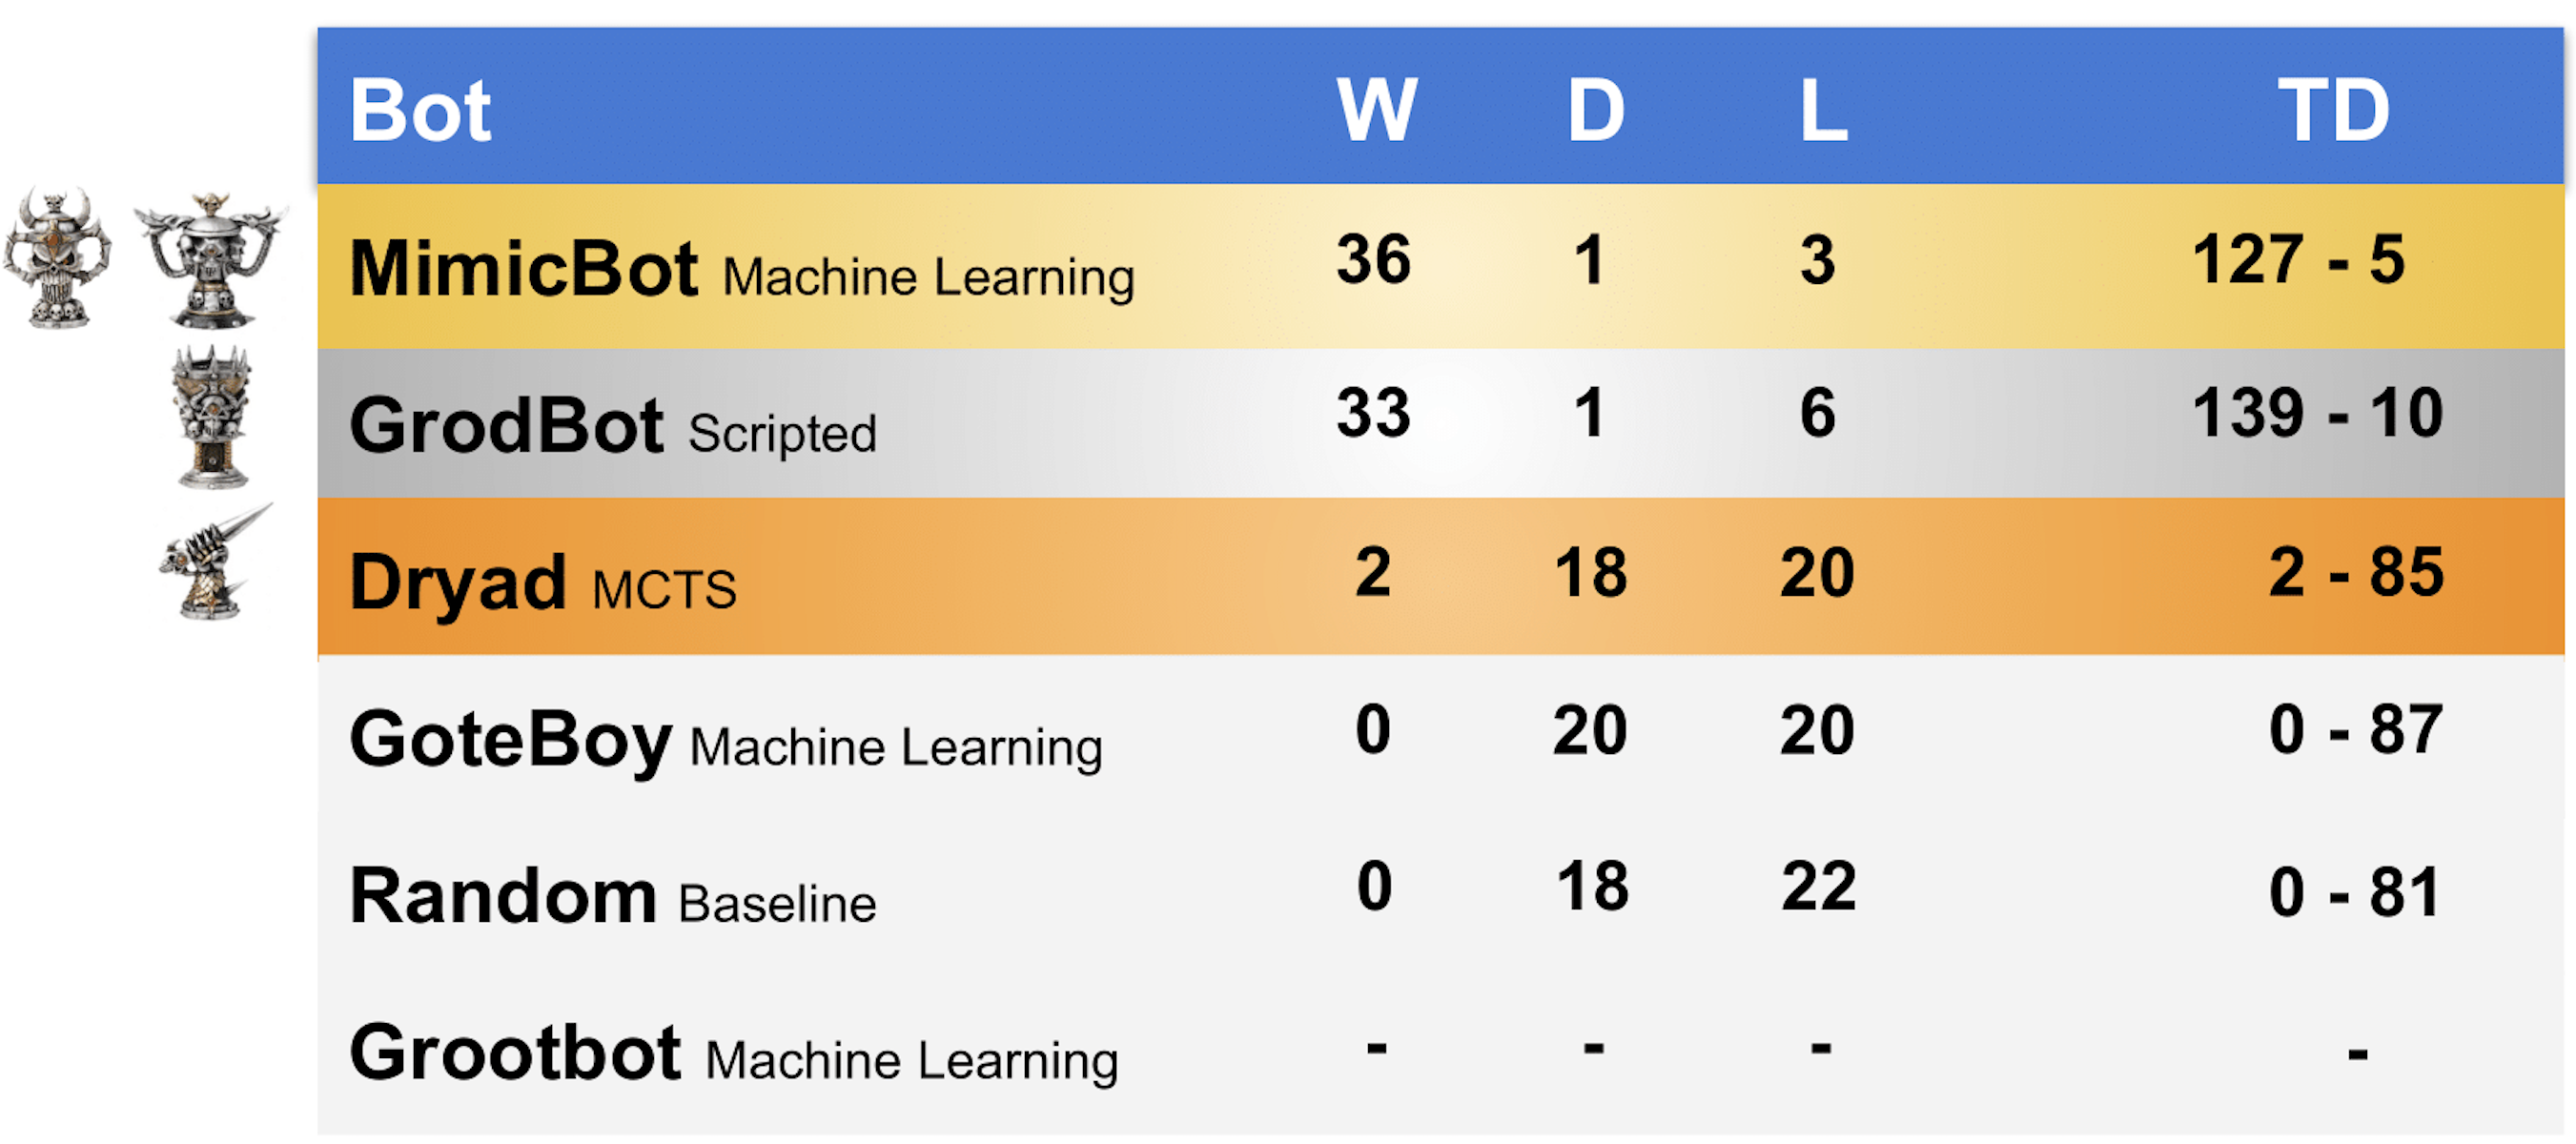 Bot Bowl III Results